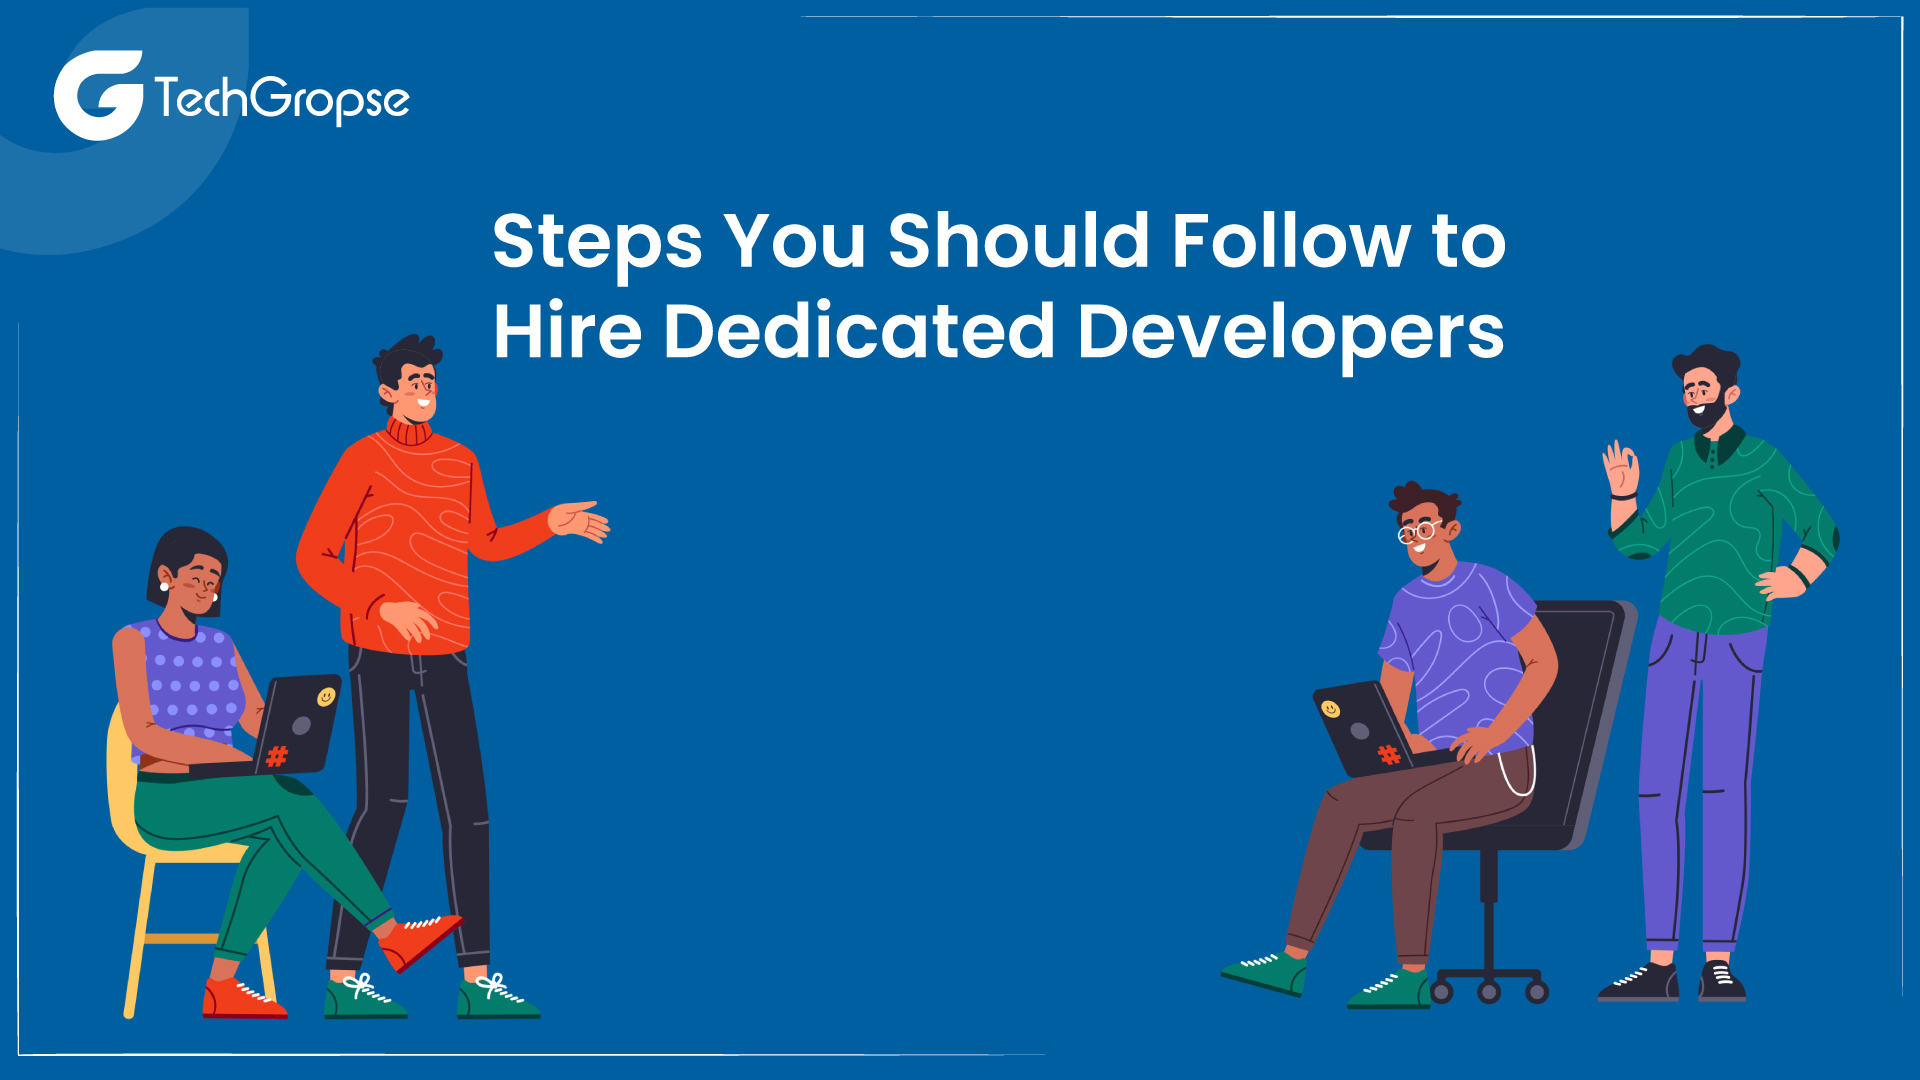 Steps You Should Follow to Hire Dedicated Developers